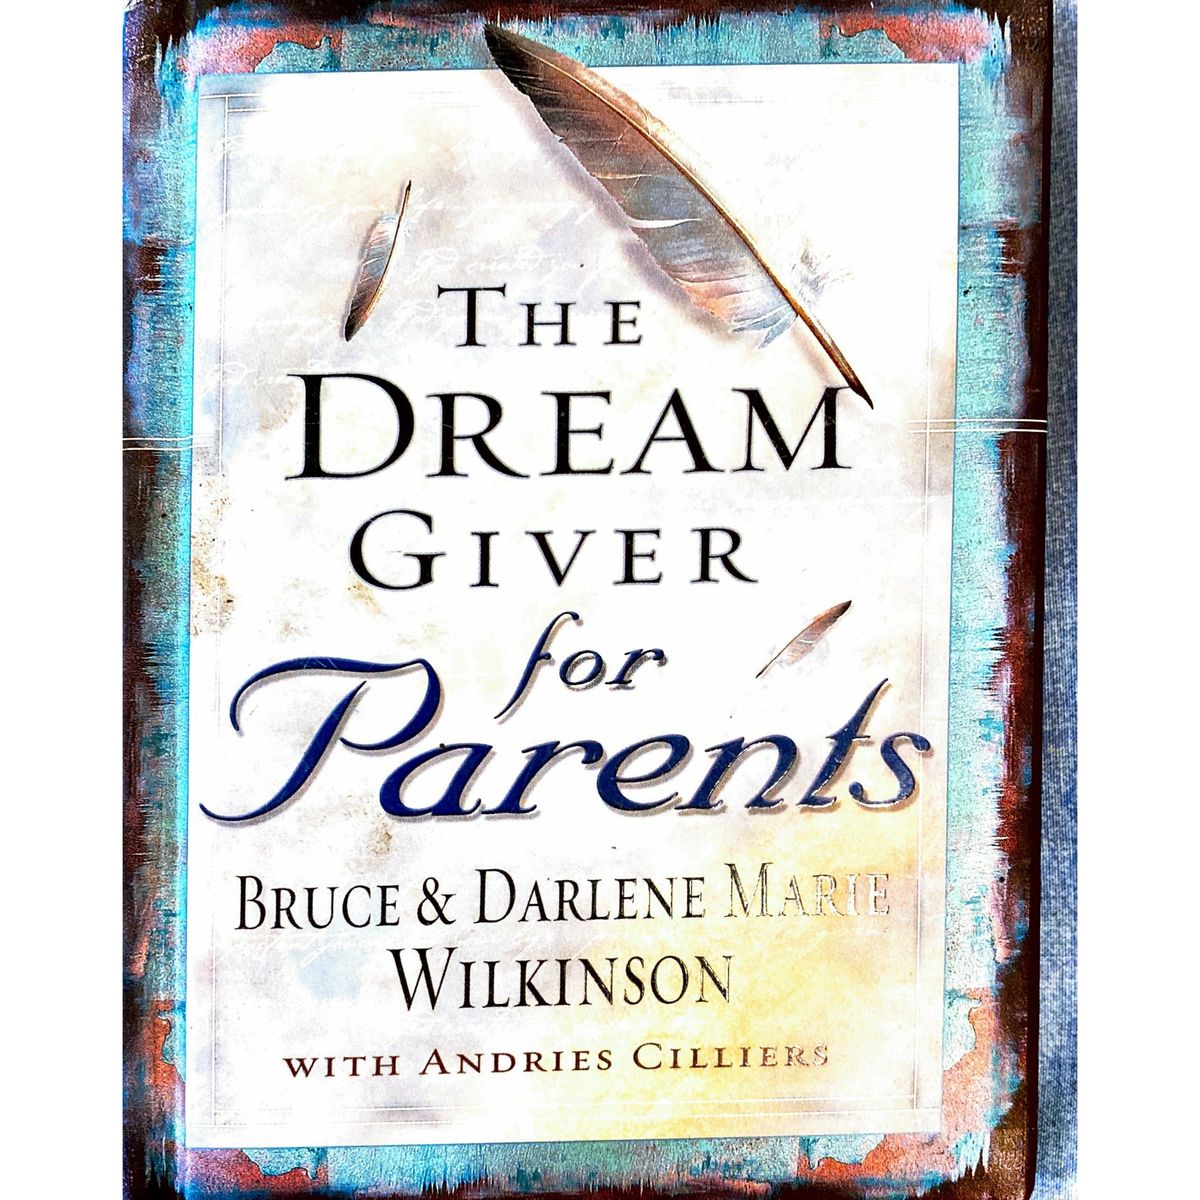 ISBN: 9780796302052 / 0796302057 - The Dream Giver For Parents by Bruce & Dalene Marie Wilkinson [2004]